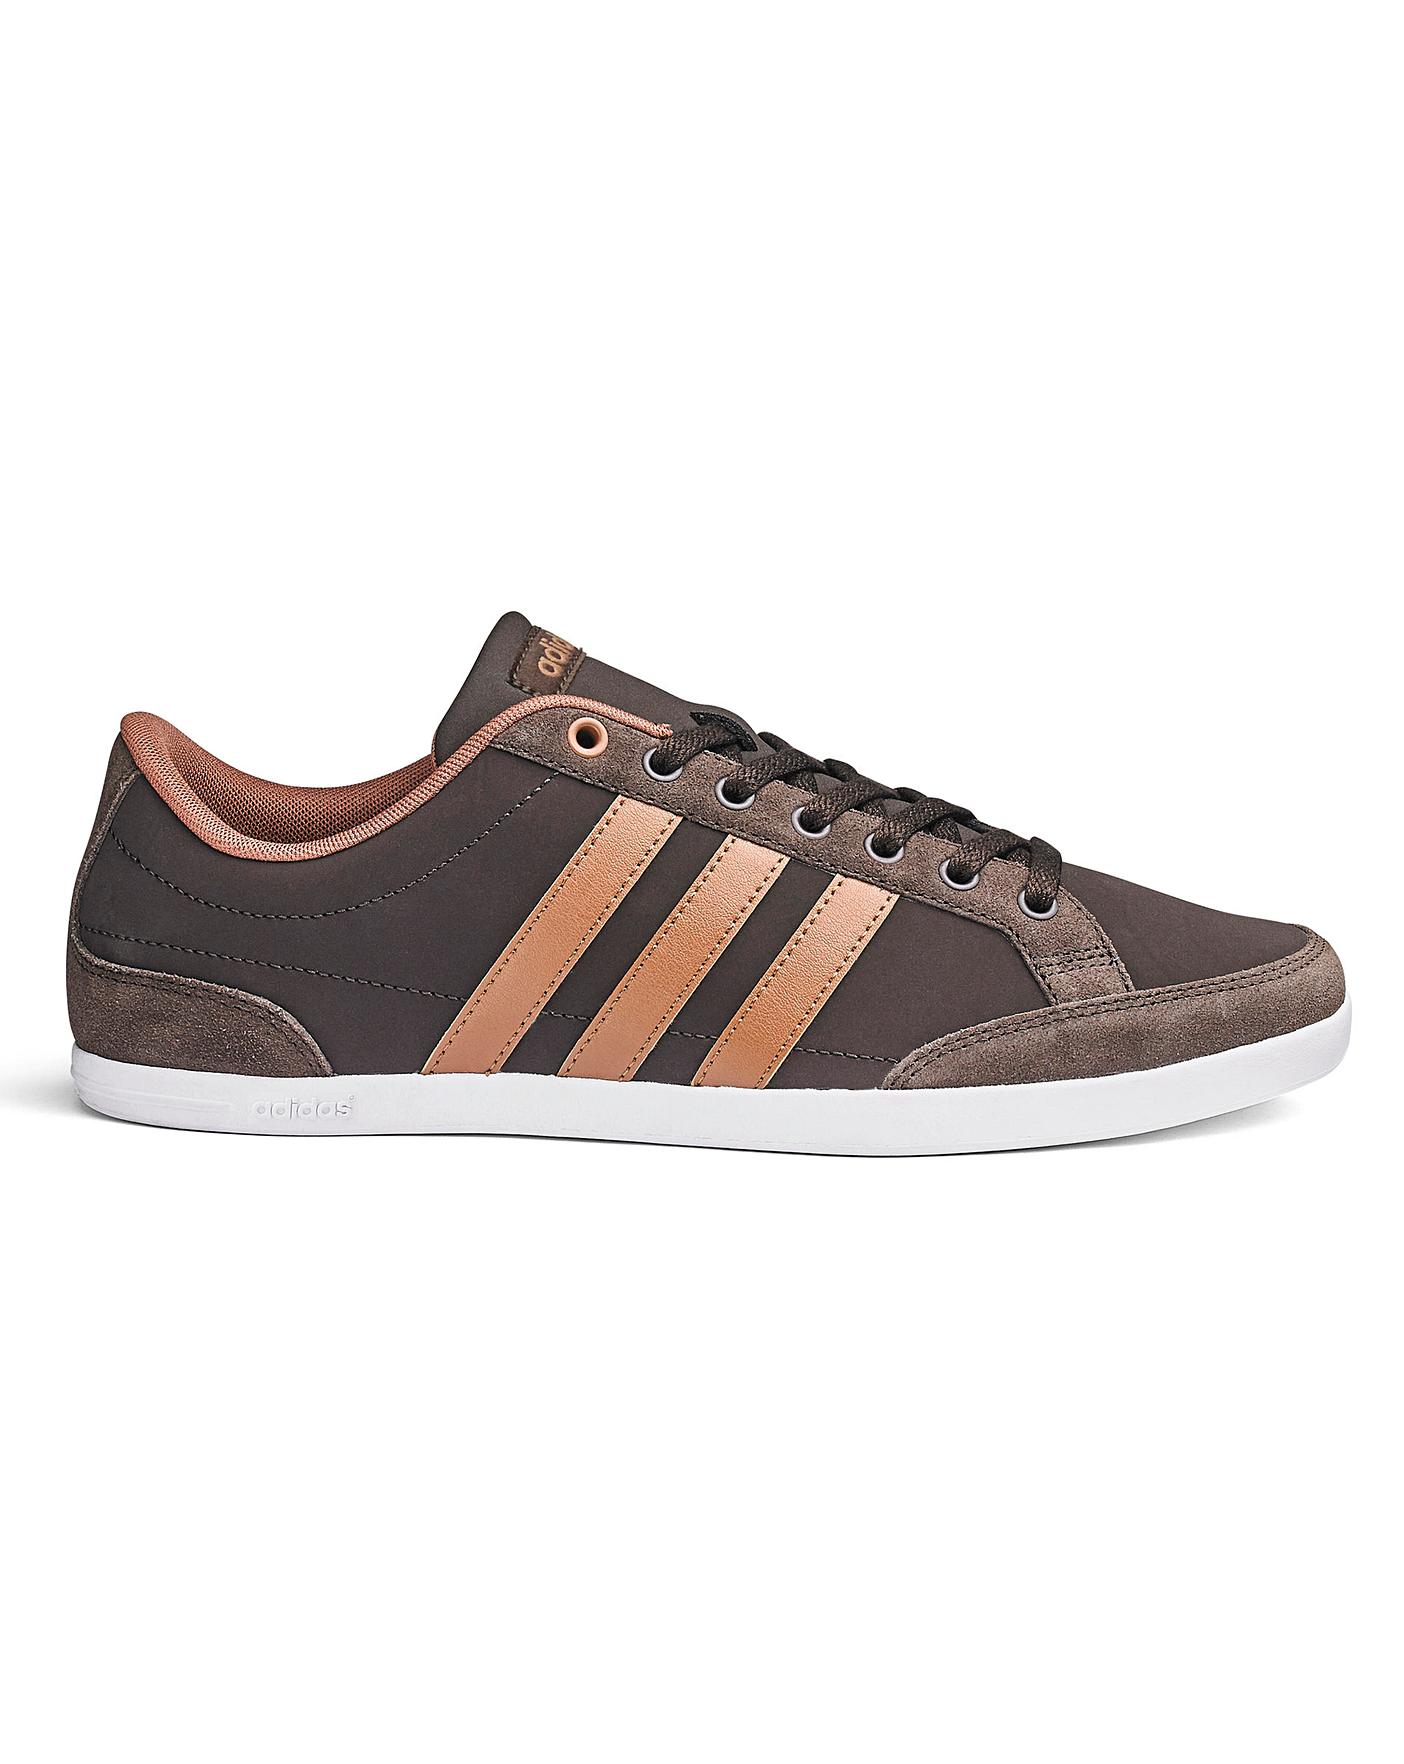 Adidas Caflaire Trainers | Oxendales